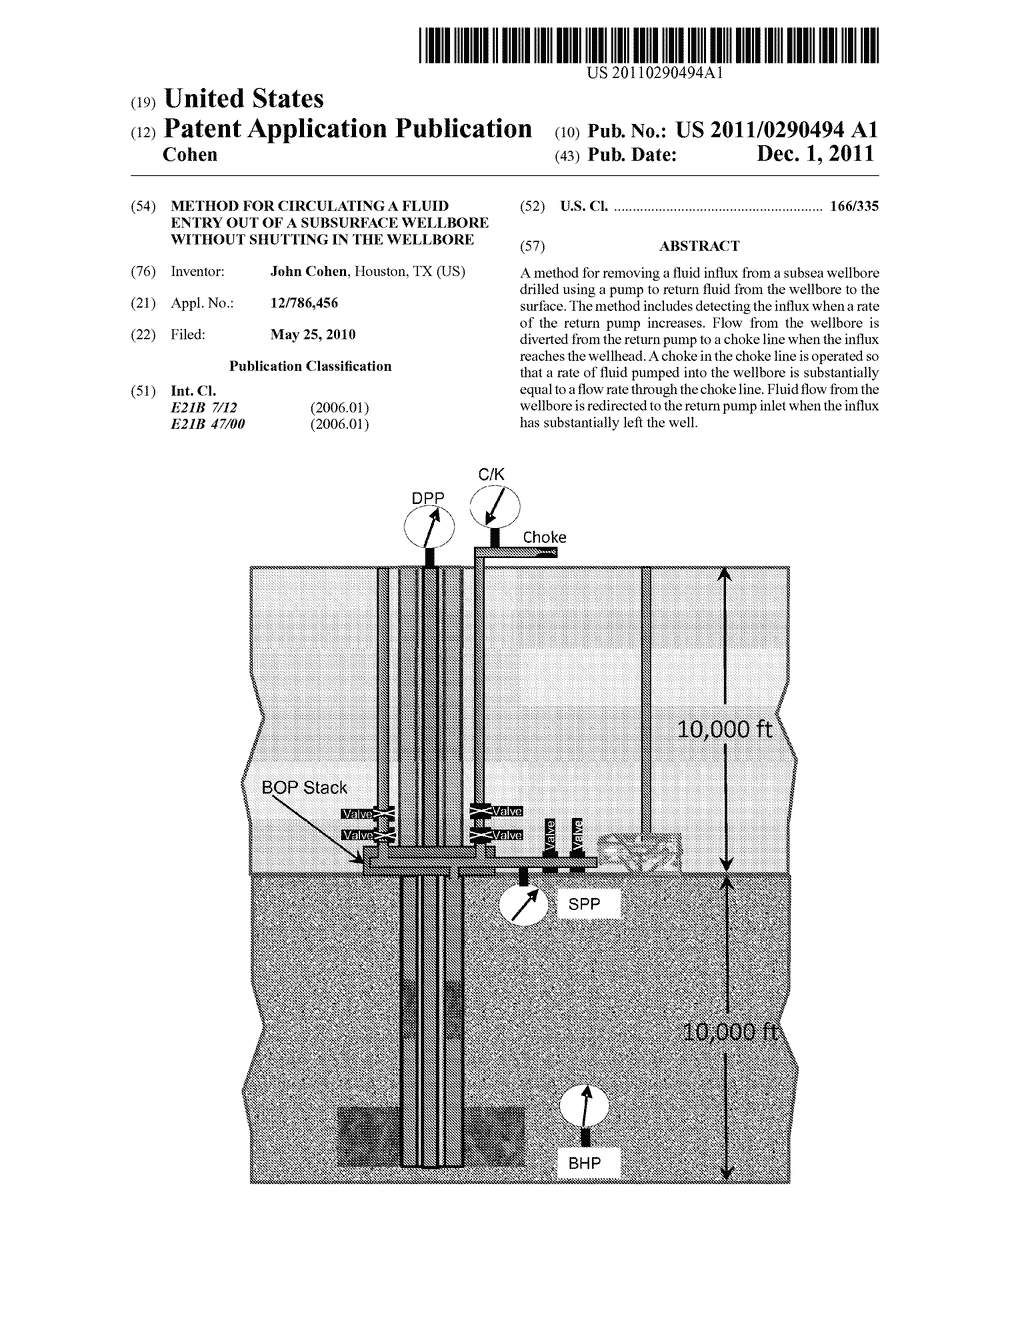 METHOD FOR CIRCULATING A FLUID ENTRY OUT OF A SUBSURFACE WELLBORE WITHOUT     SHUTTING IN THE WELLBORE - diagram, schematic, and image 01